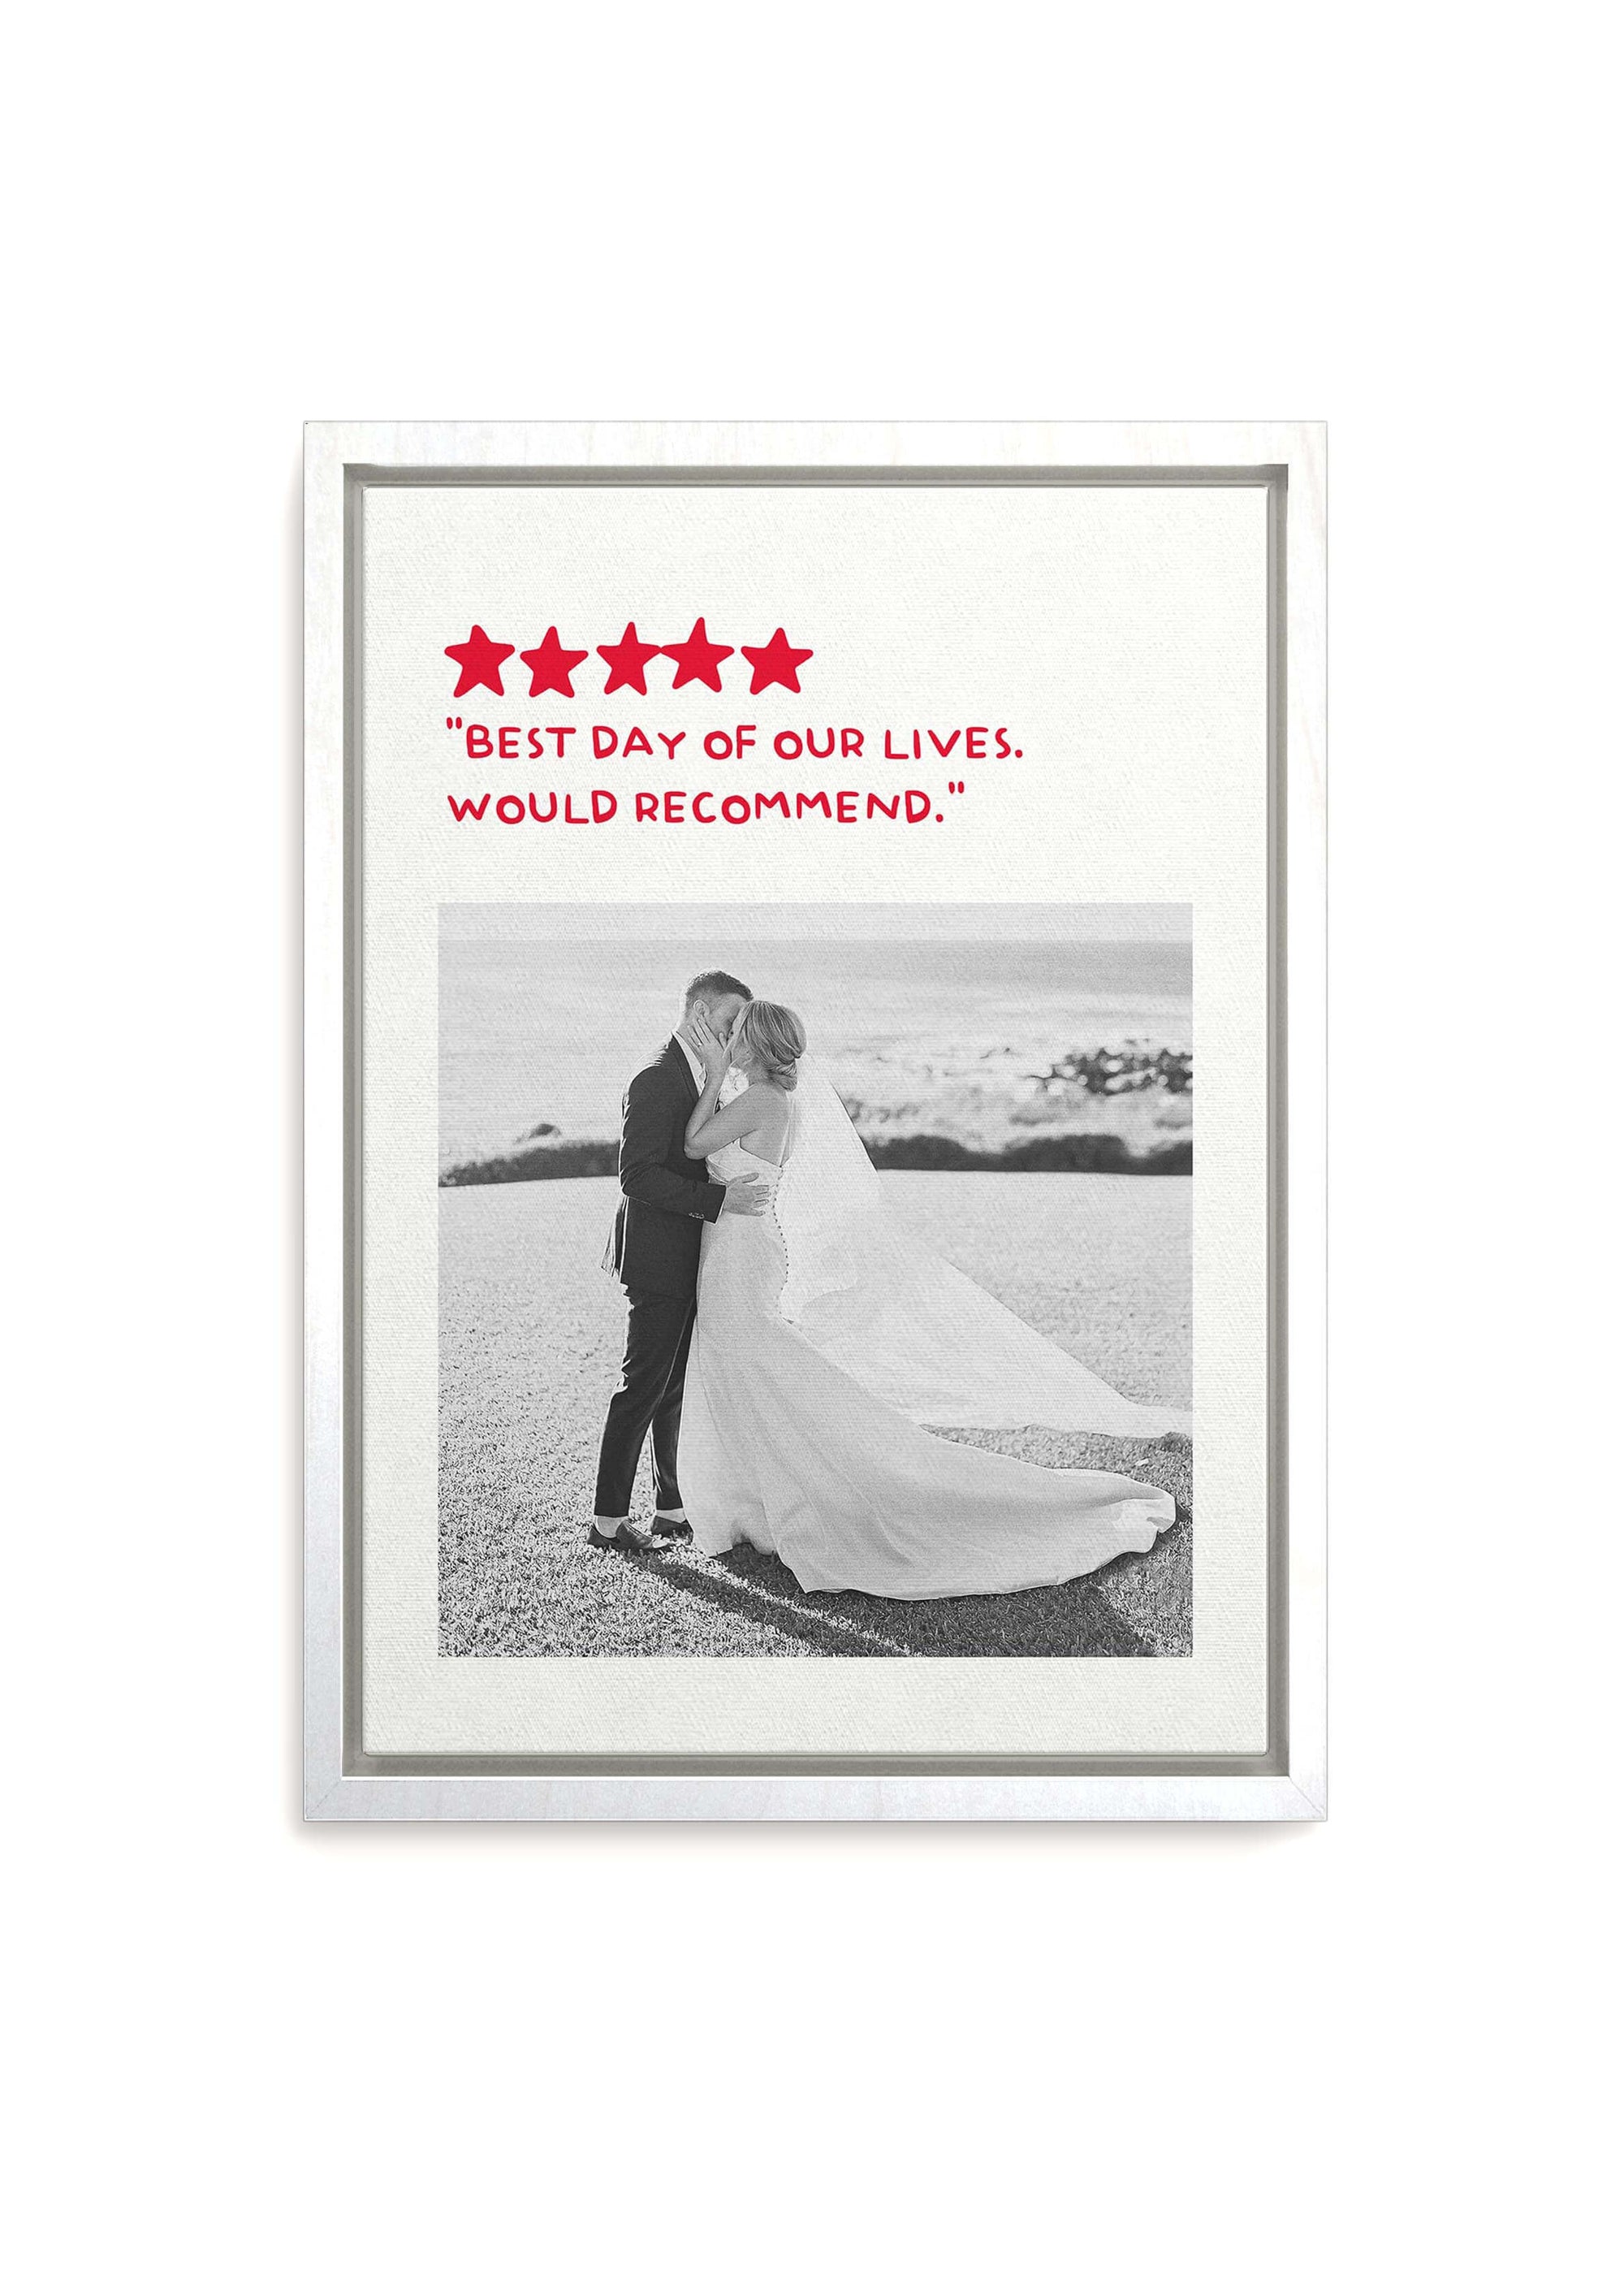 Personalized anniversary gift with photo of couple on their wedding day turned into black and white on white framed canvas with a custom humorous review added. Canvas is on white background.